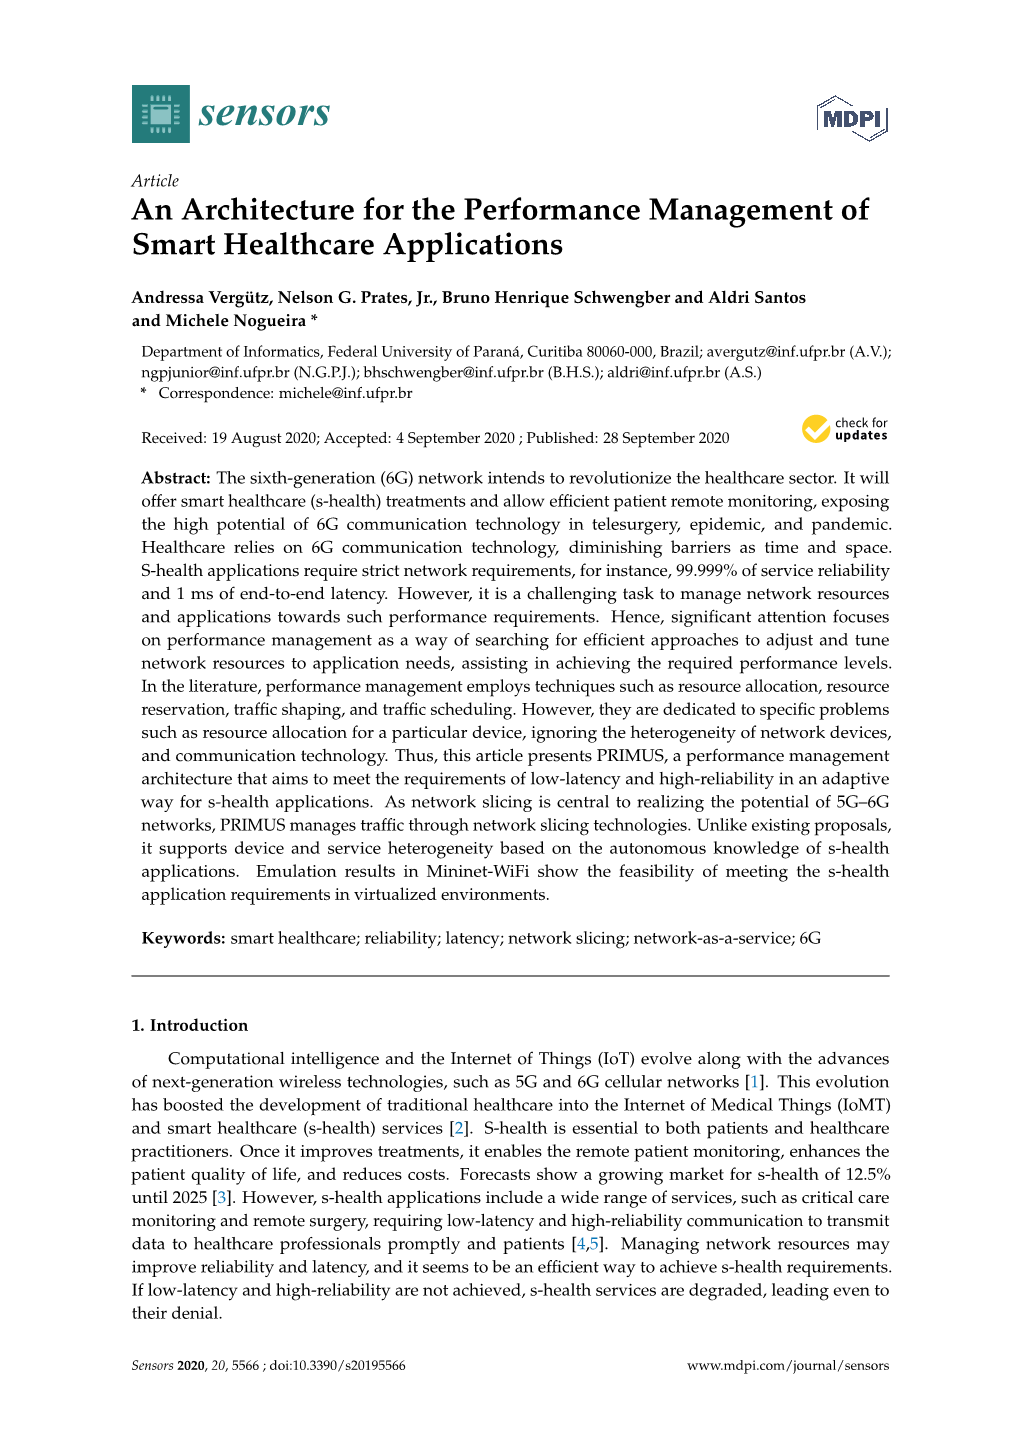 An Architecture for the Performance Management of Smart Healthcare Applications